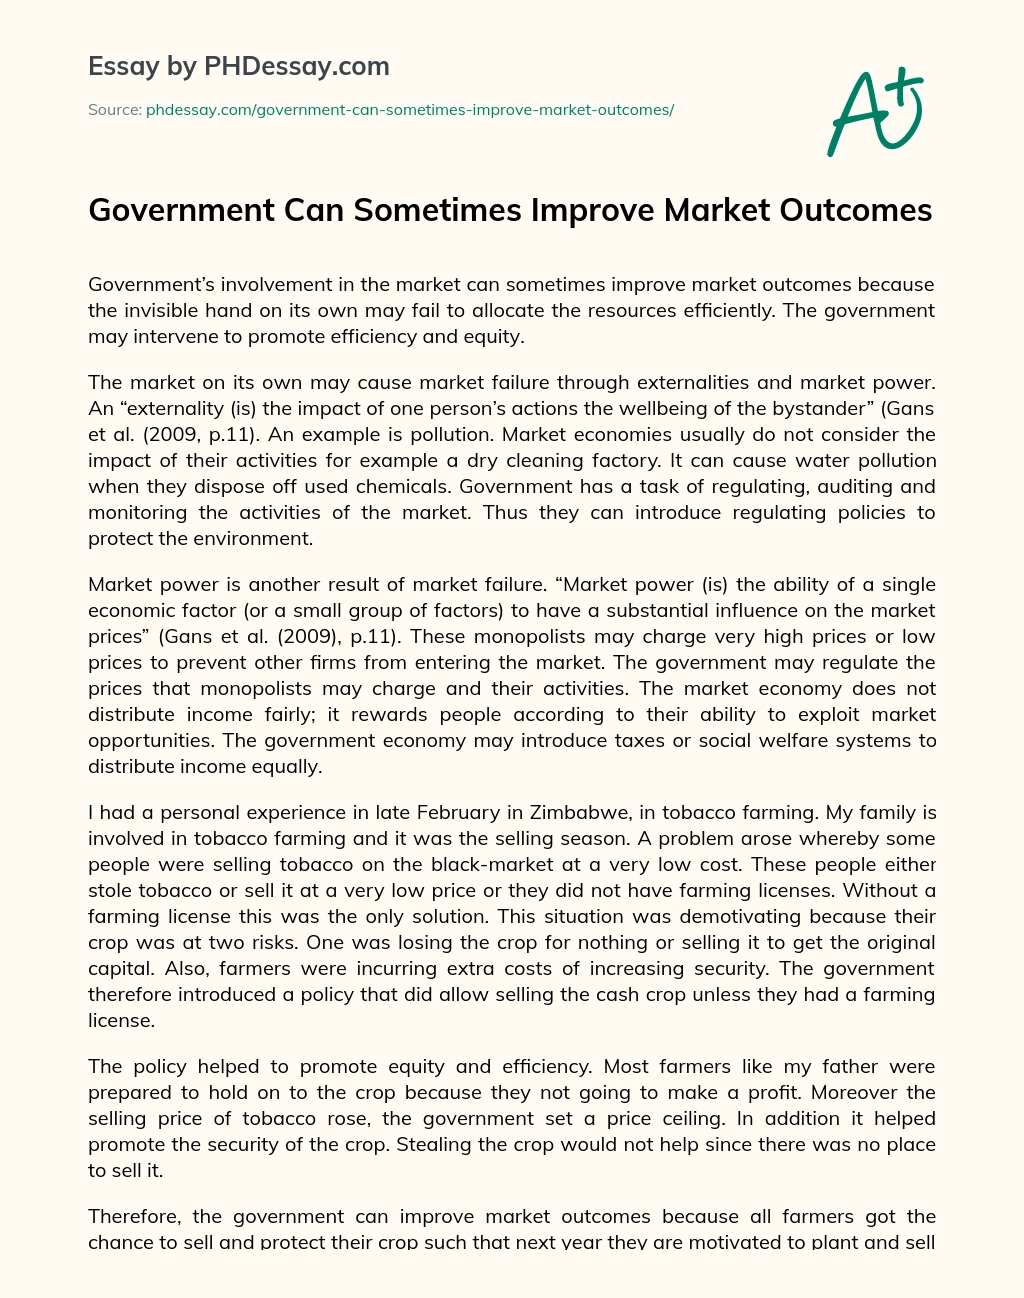 Government Can Sometimes Improve Market Outcomes essay